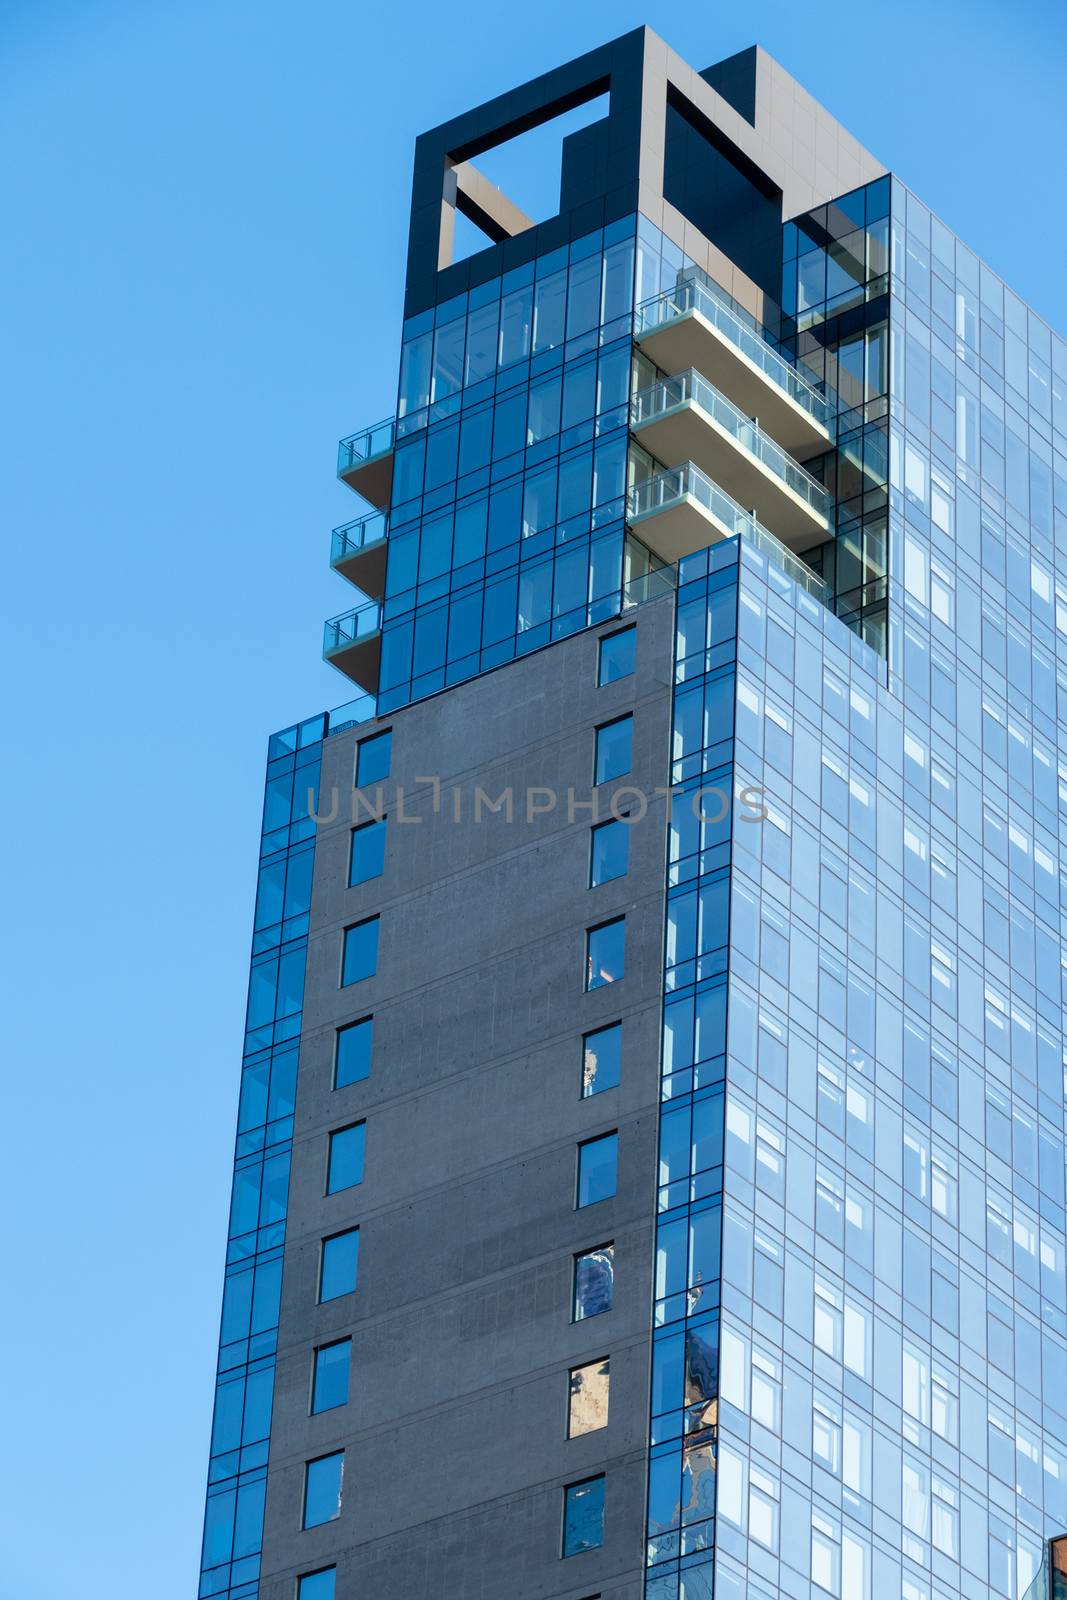 An image of a modern building in New York